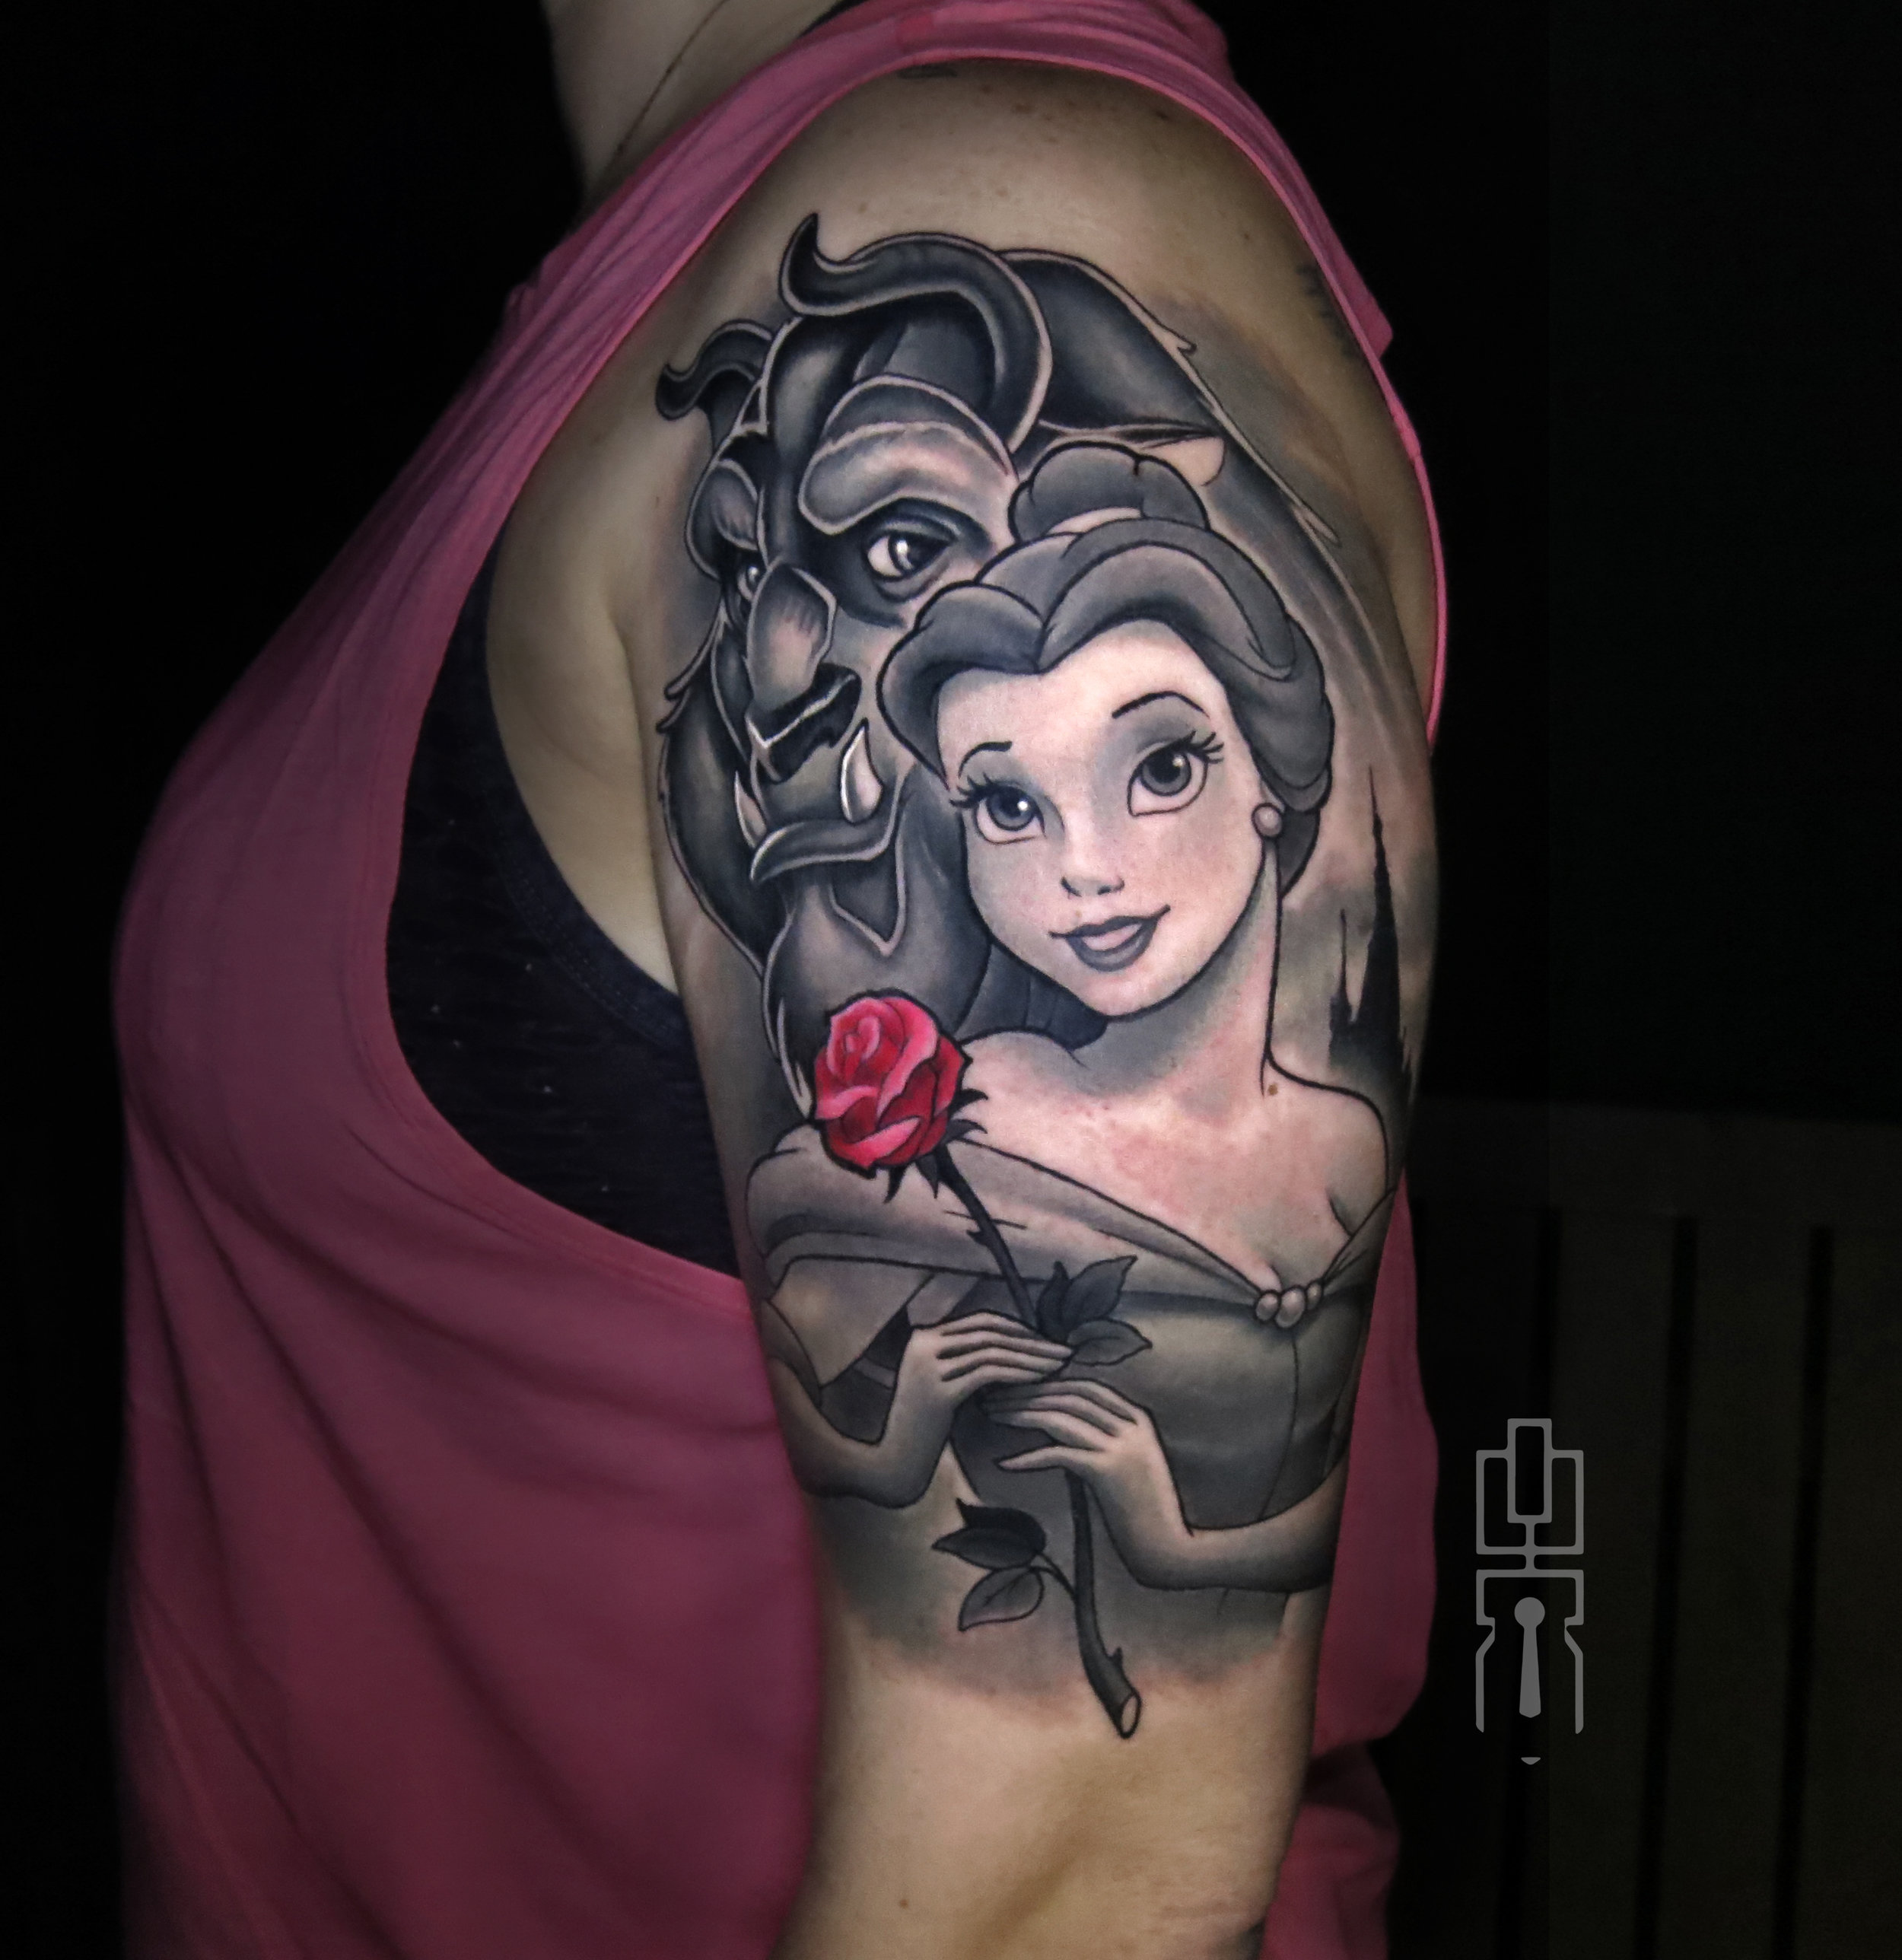 belle beauty and the beast tattoo.jpg